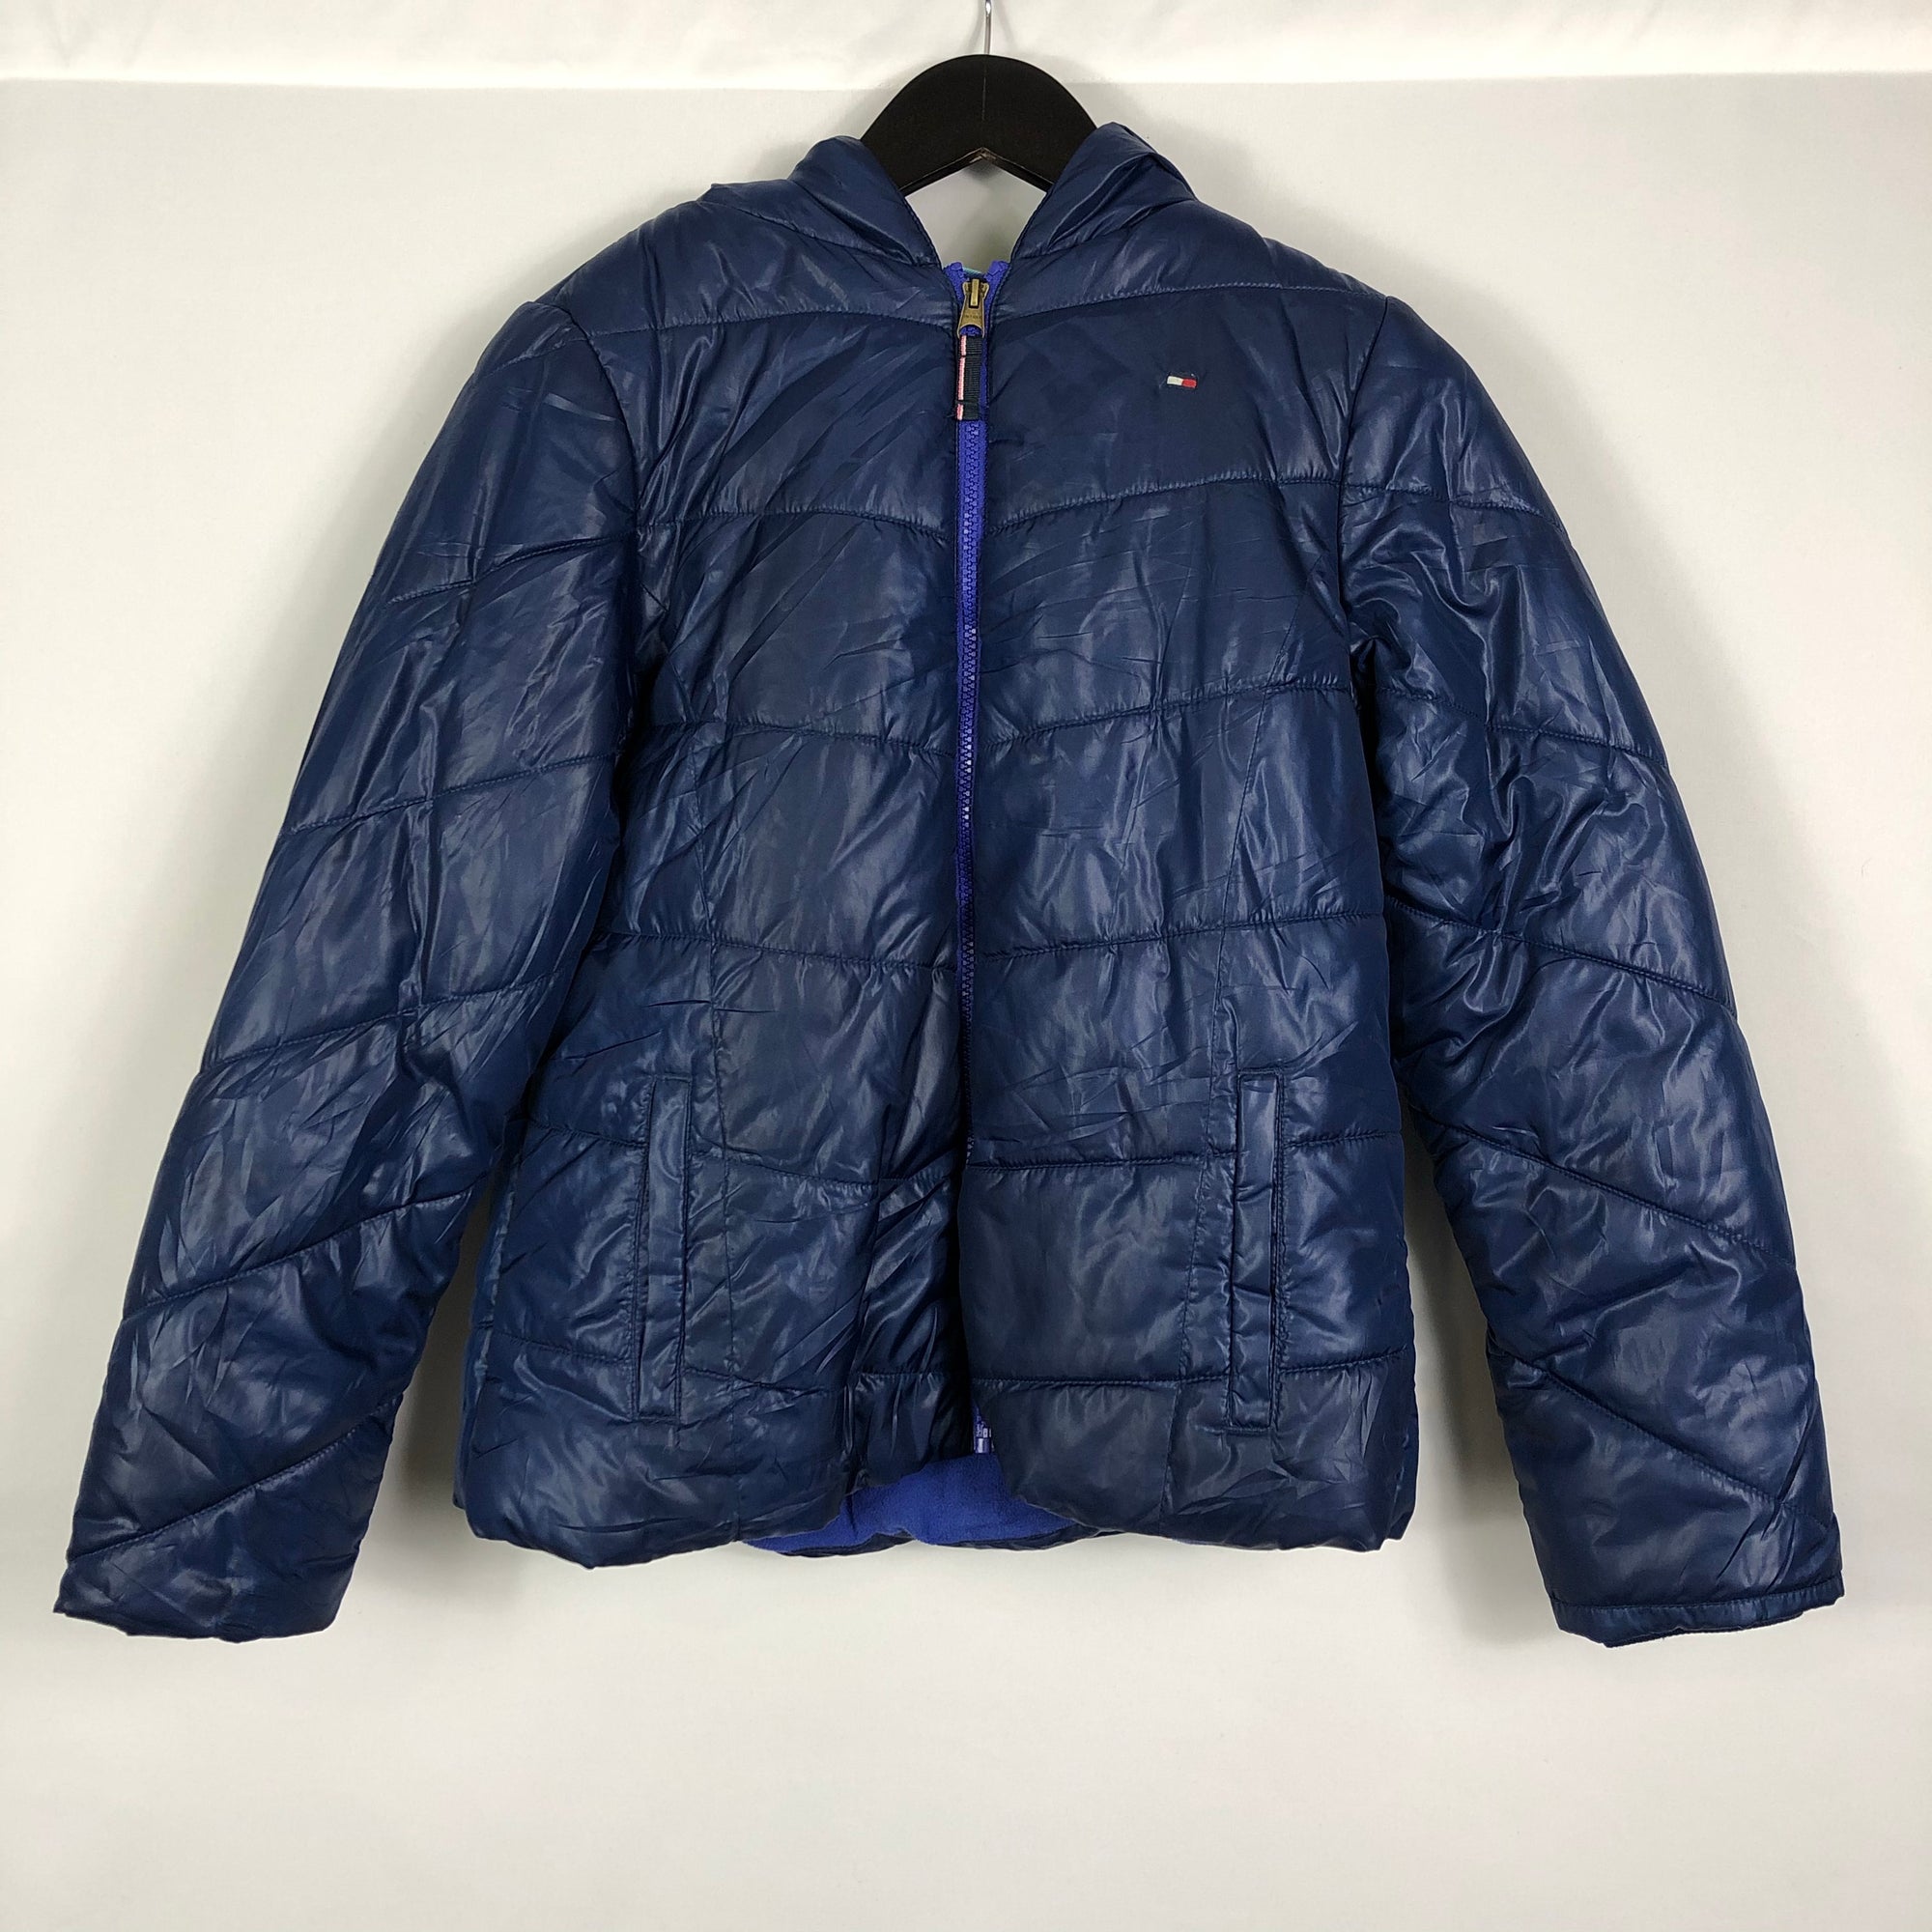 Tommy Hilfiger Puffer Jacket in Navy - Women’s Small